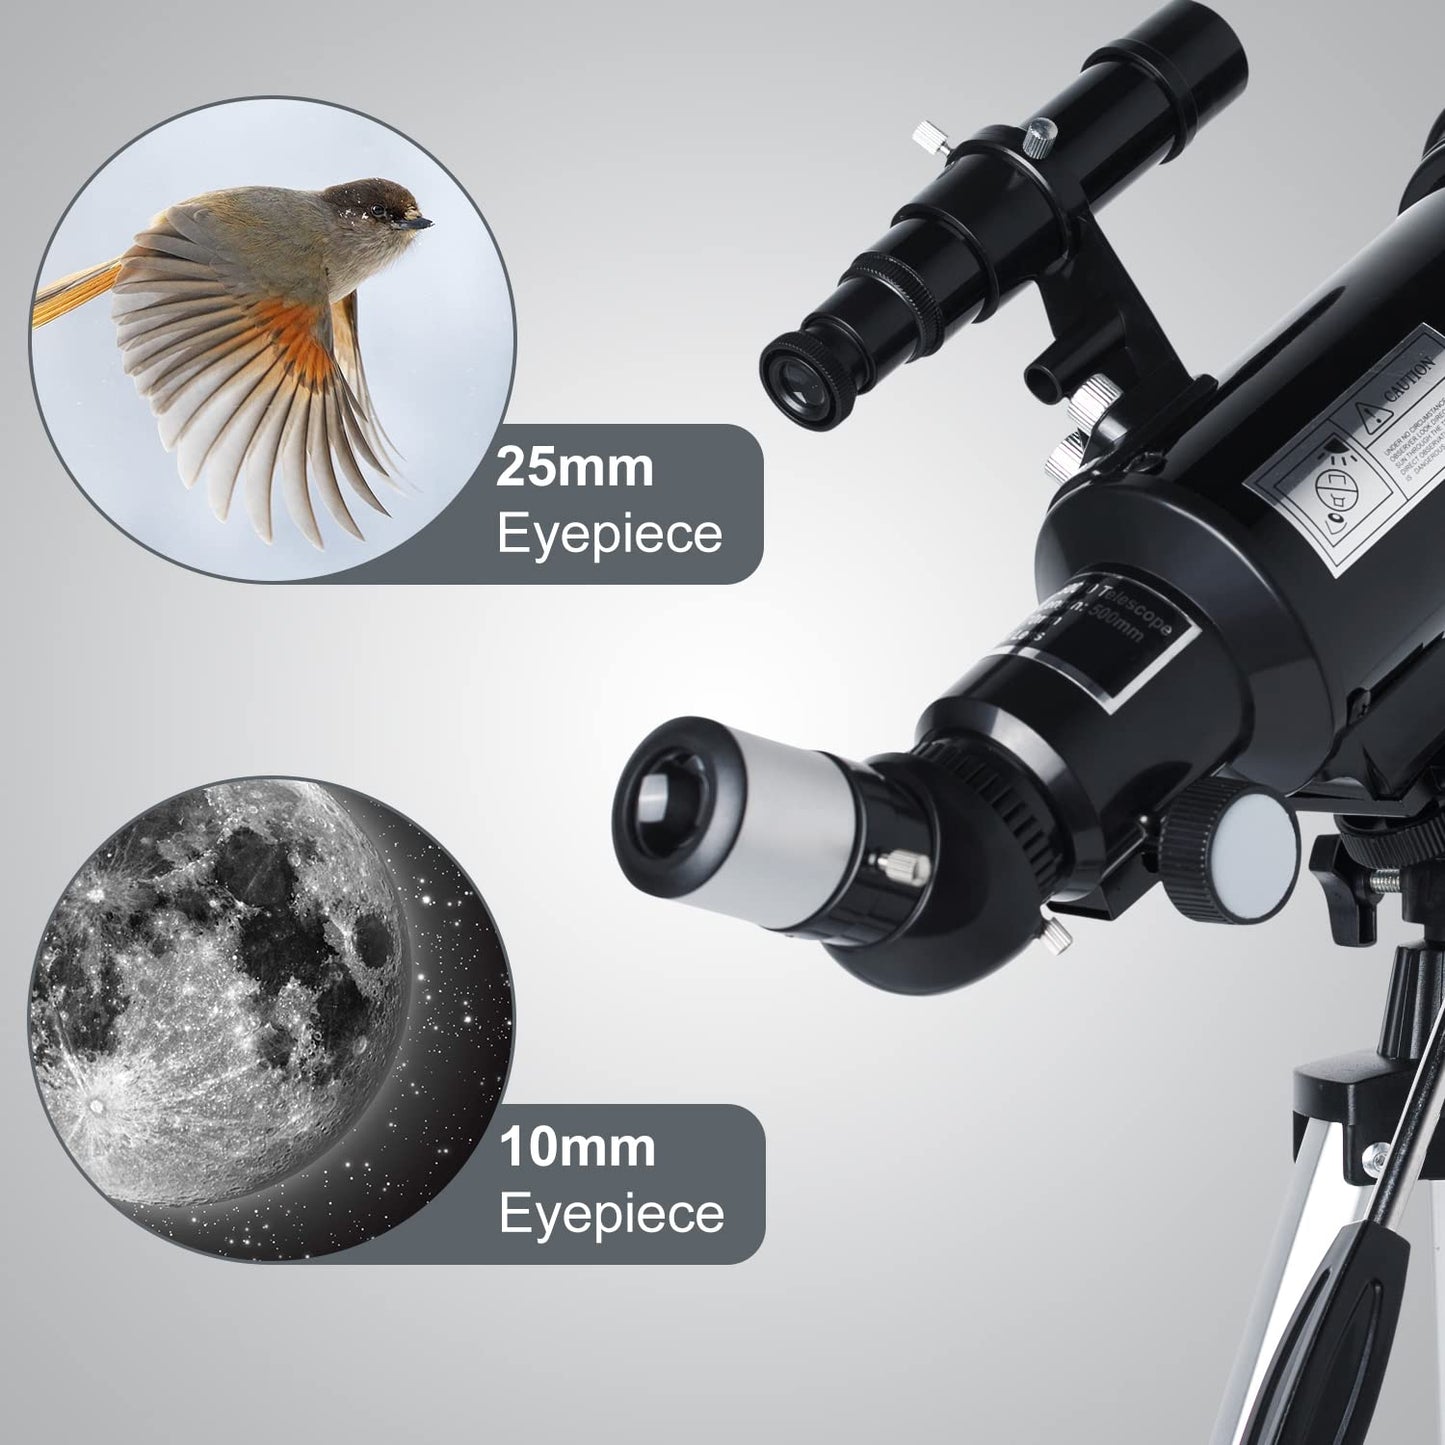 Telescope 70mm Aperture 500mm - for Kids & Adults Astronomical refracting Portable Telescopes AZ Mount Fully Multi-Coated Optics, with Tripod Phone Adapter, Wireless Remote, Carrying Bag Black